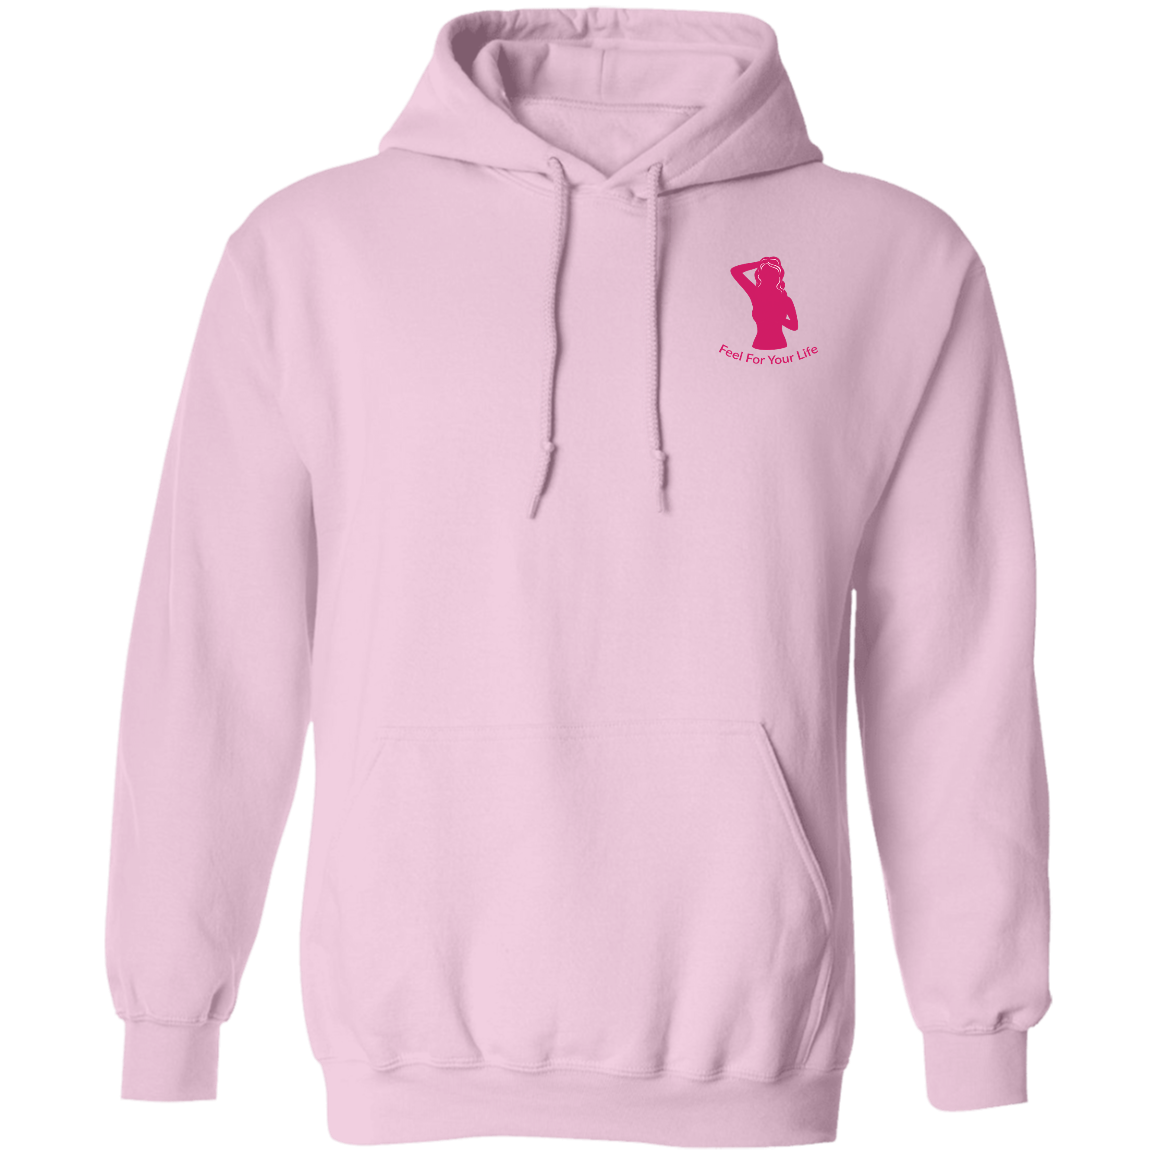 Feel For Your Life Unisex Hoodie Light Pink w/Hot Pink Logo Small